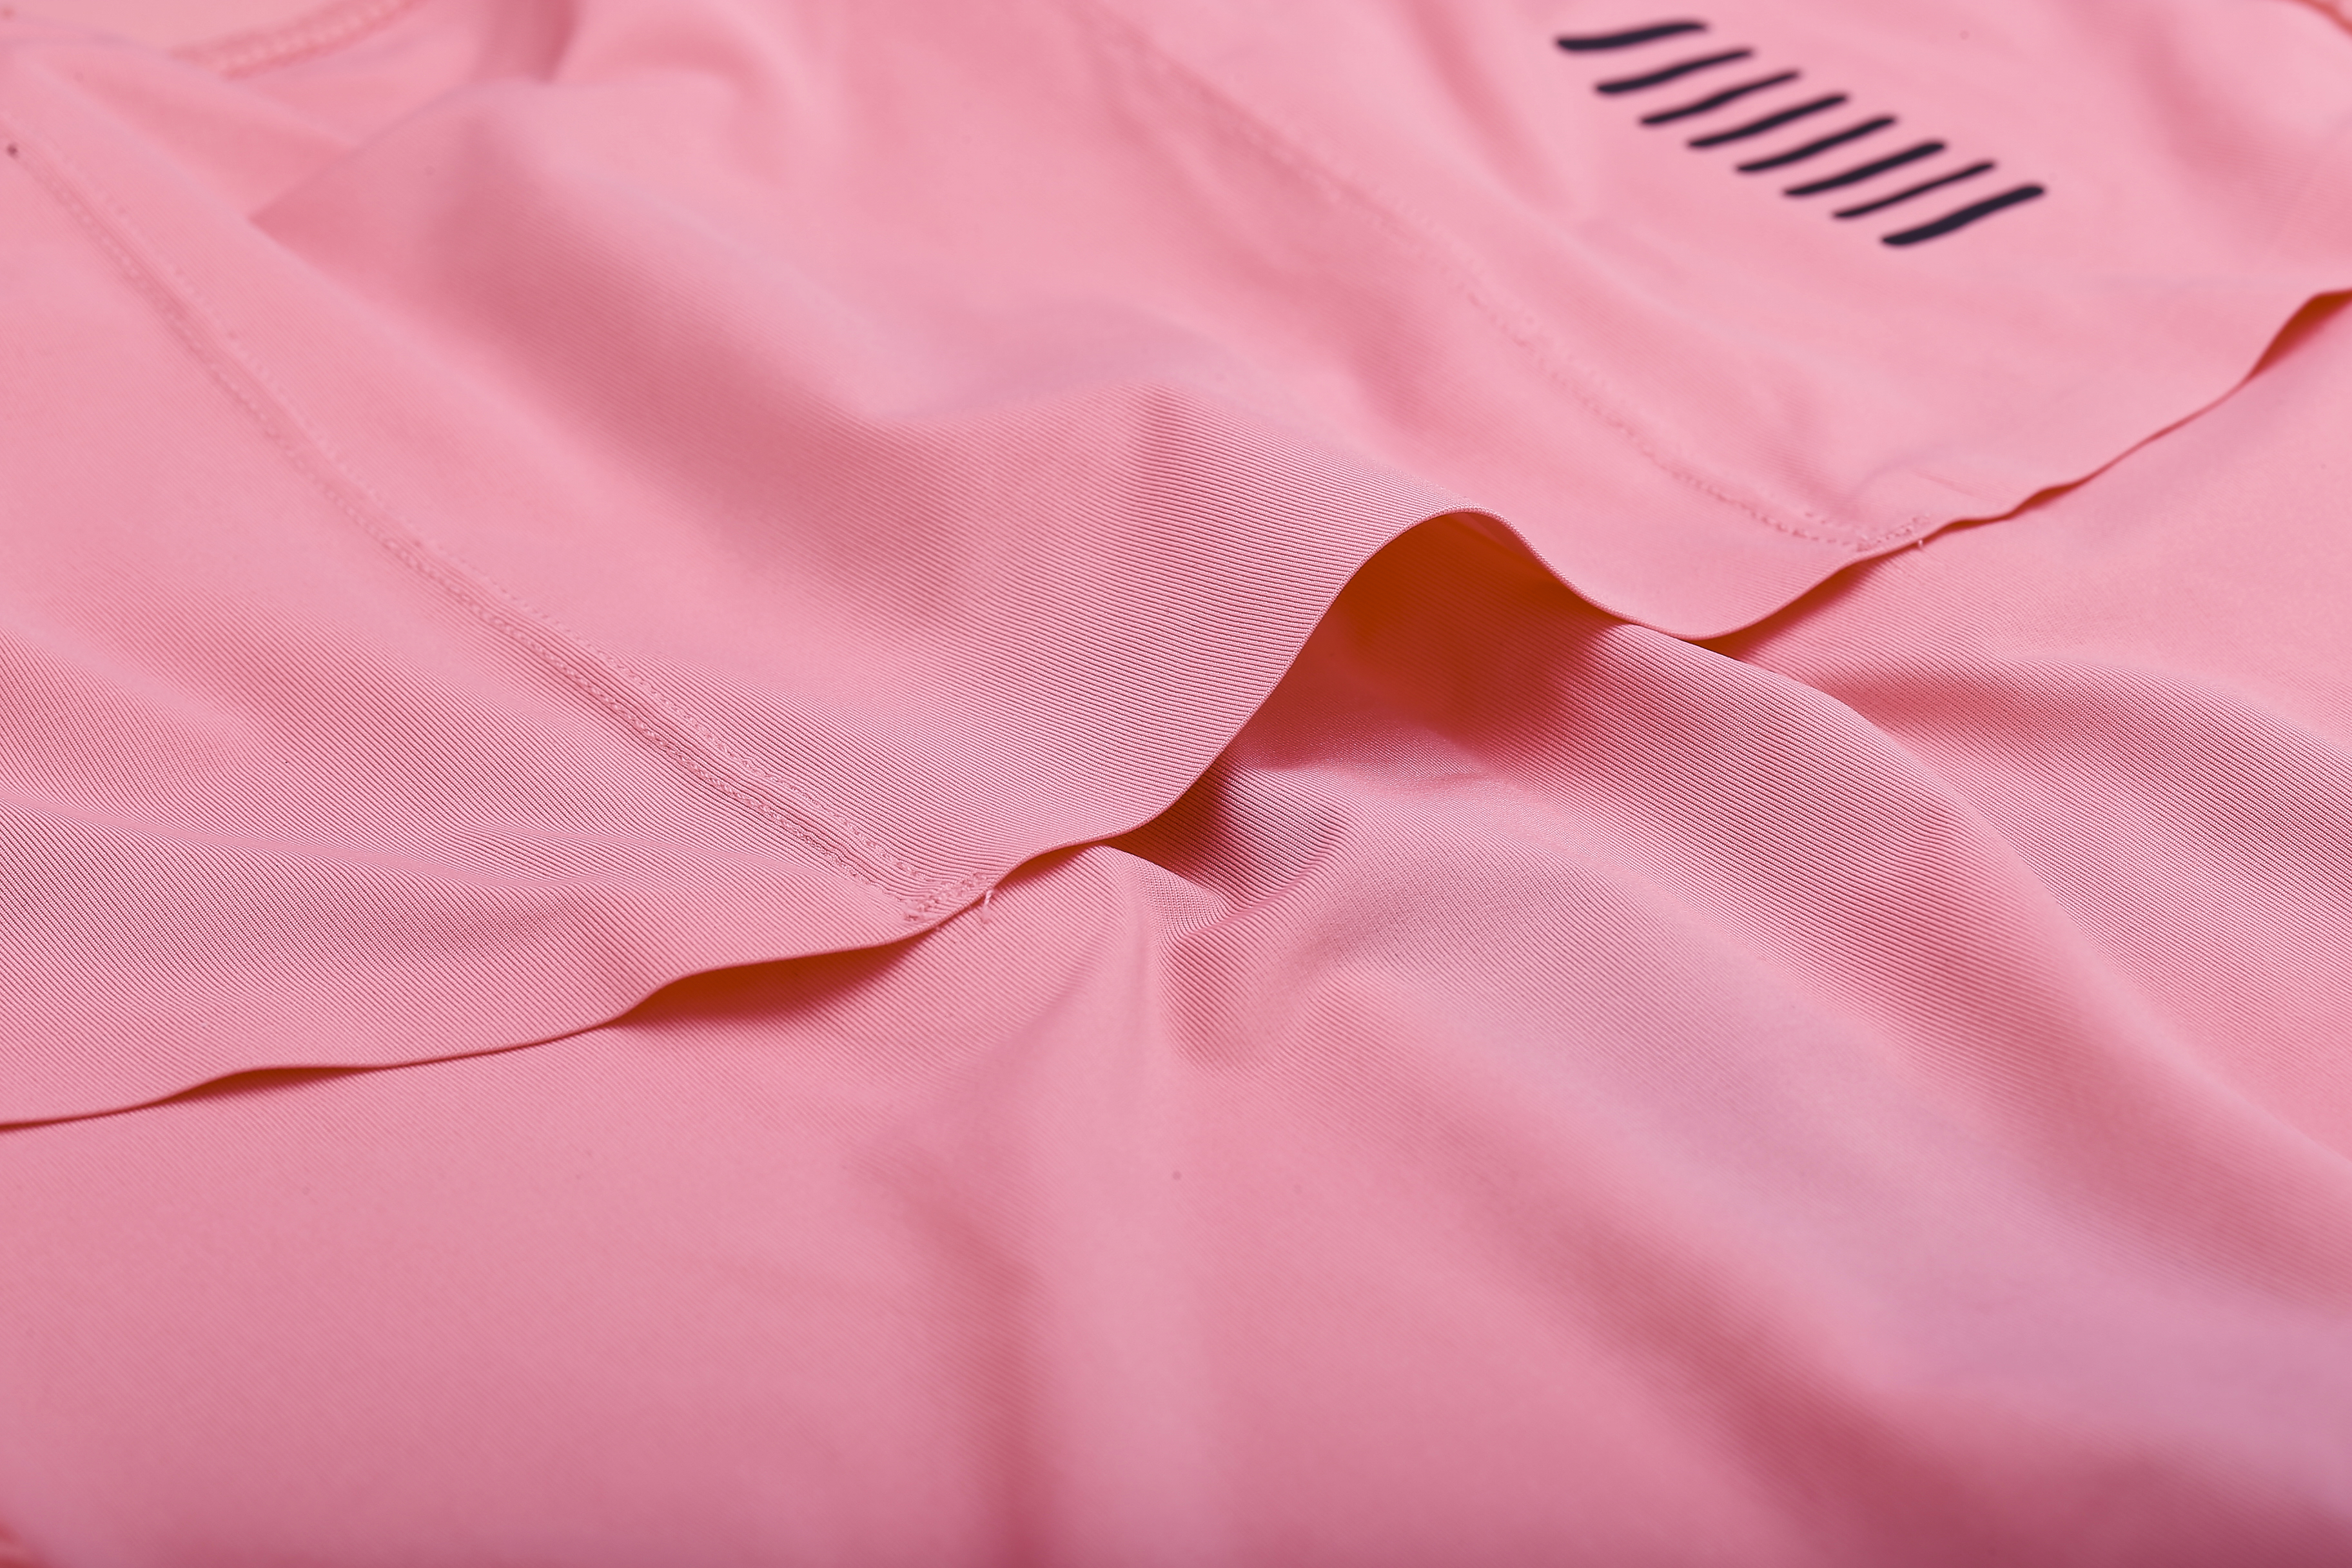 Rapha launches Merino Trail collection for mountain biking | off-road.cc